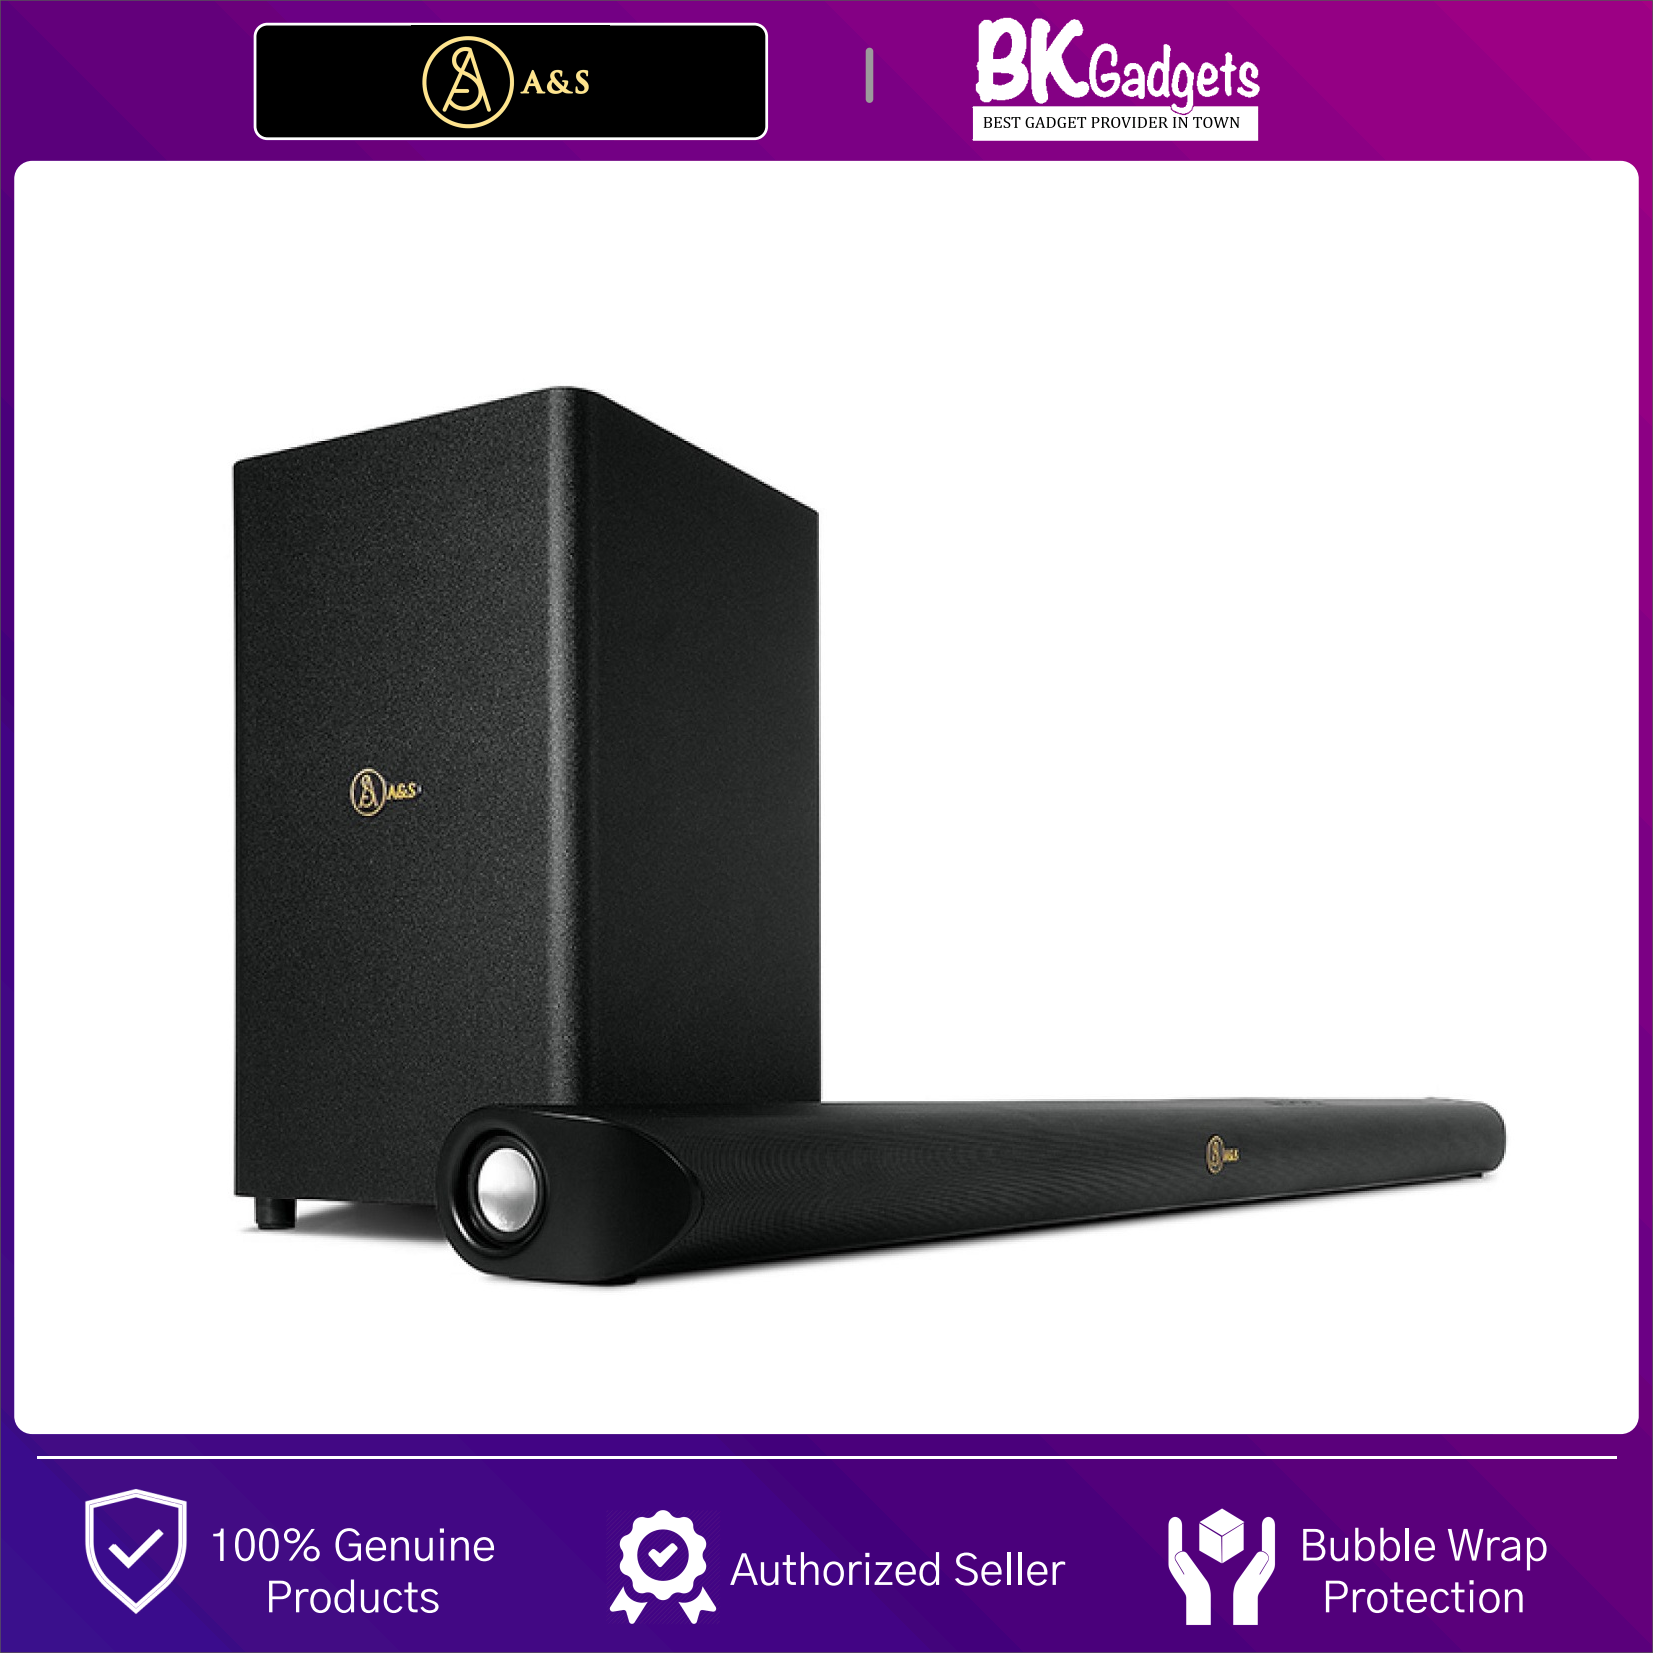 A&S Cinematic Bar with Dolby Atmos 800 - Incredible Dolby Atmos 5.1.2 Channel Soundbar System | Maximum Power Output 380W